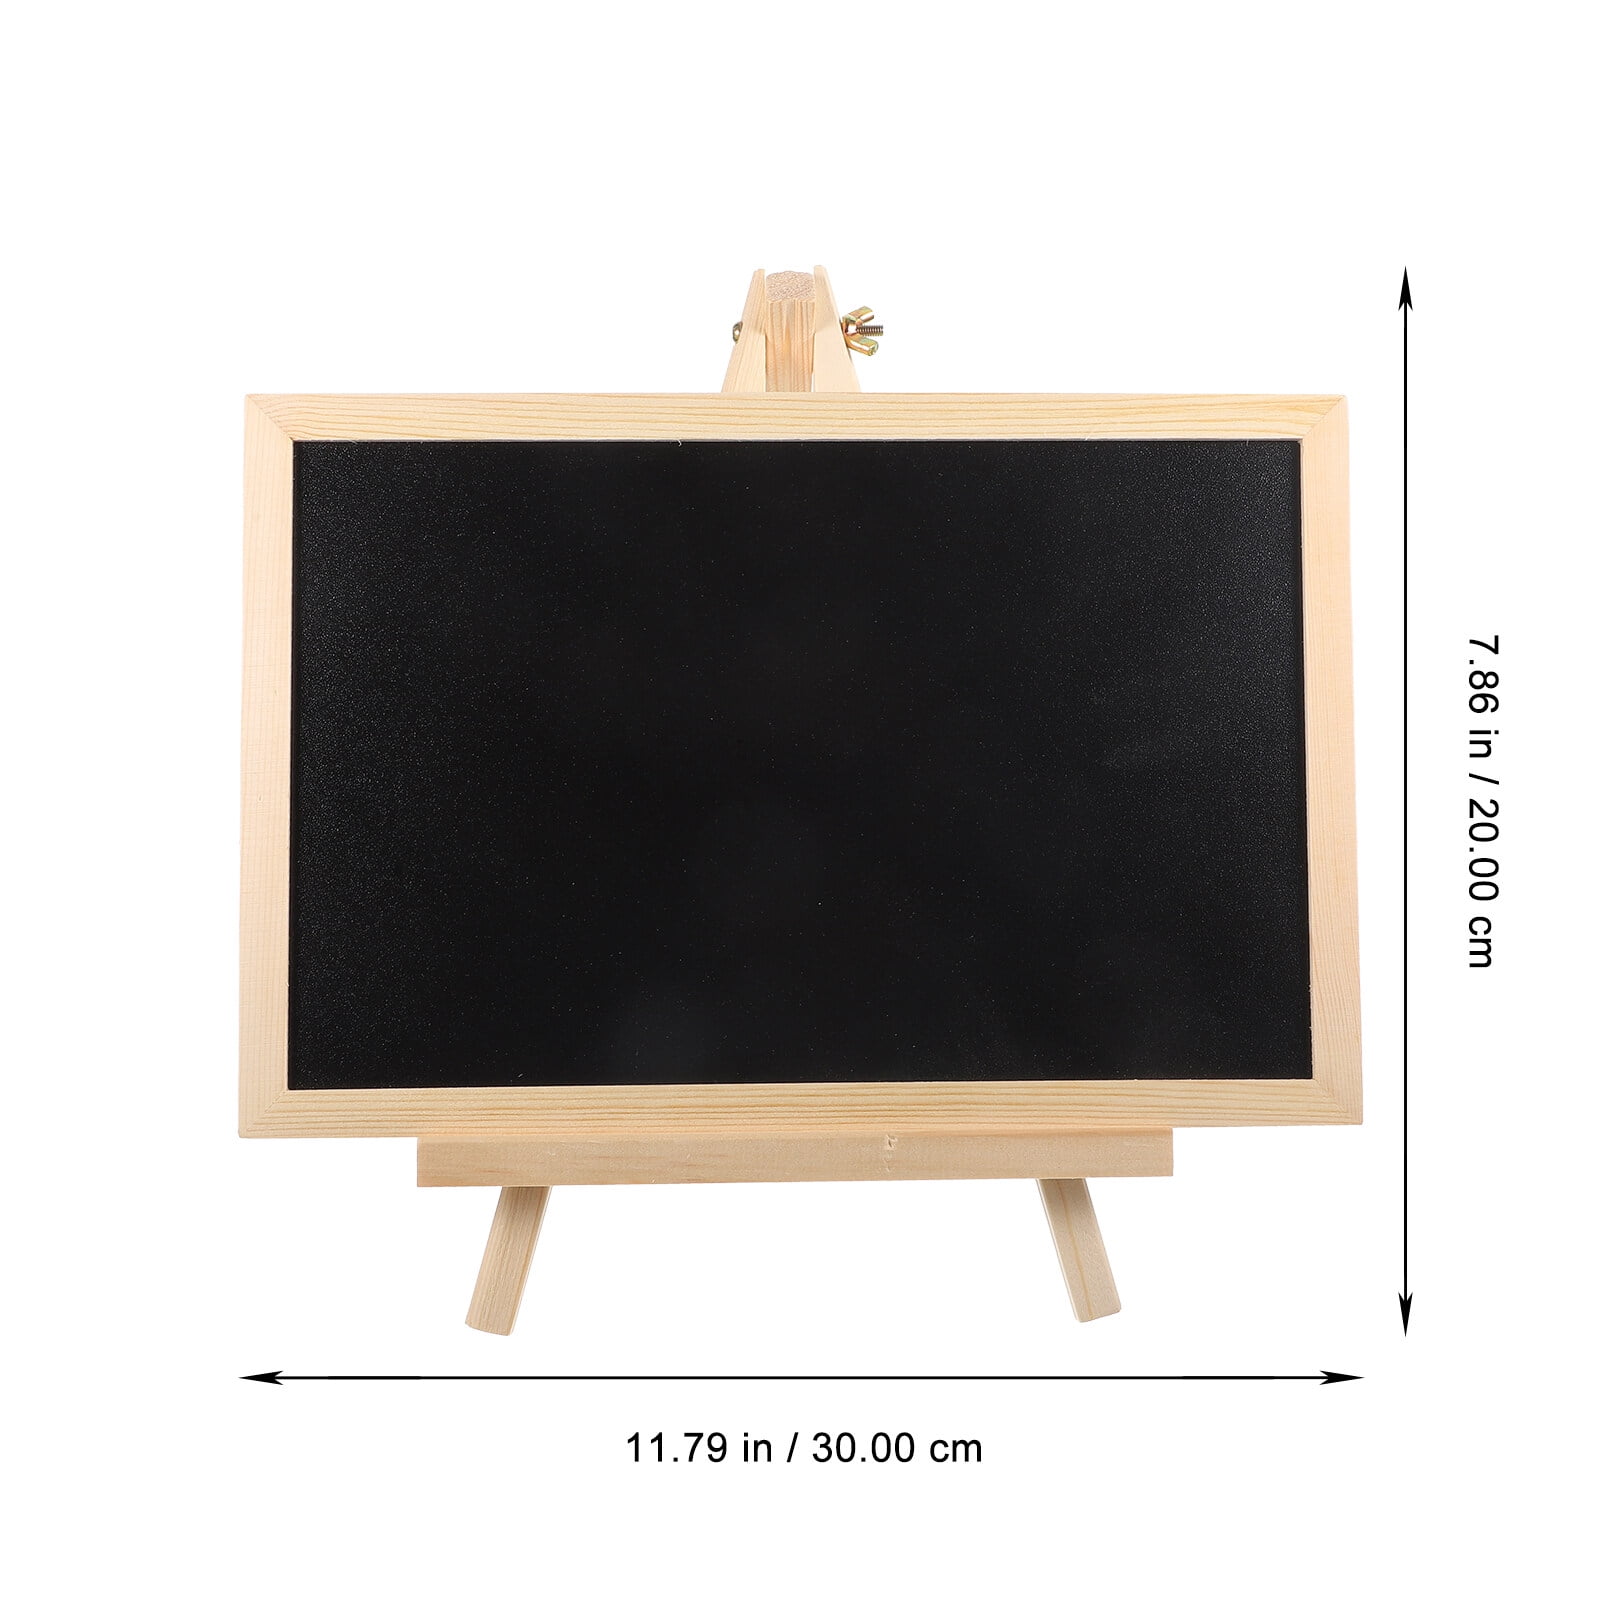 Ounona 1pc Small Chalkboard Kid Painting Board Wooden Drawing Calligraphy Board, Size: 17.5x12.5cm